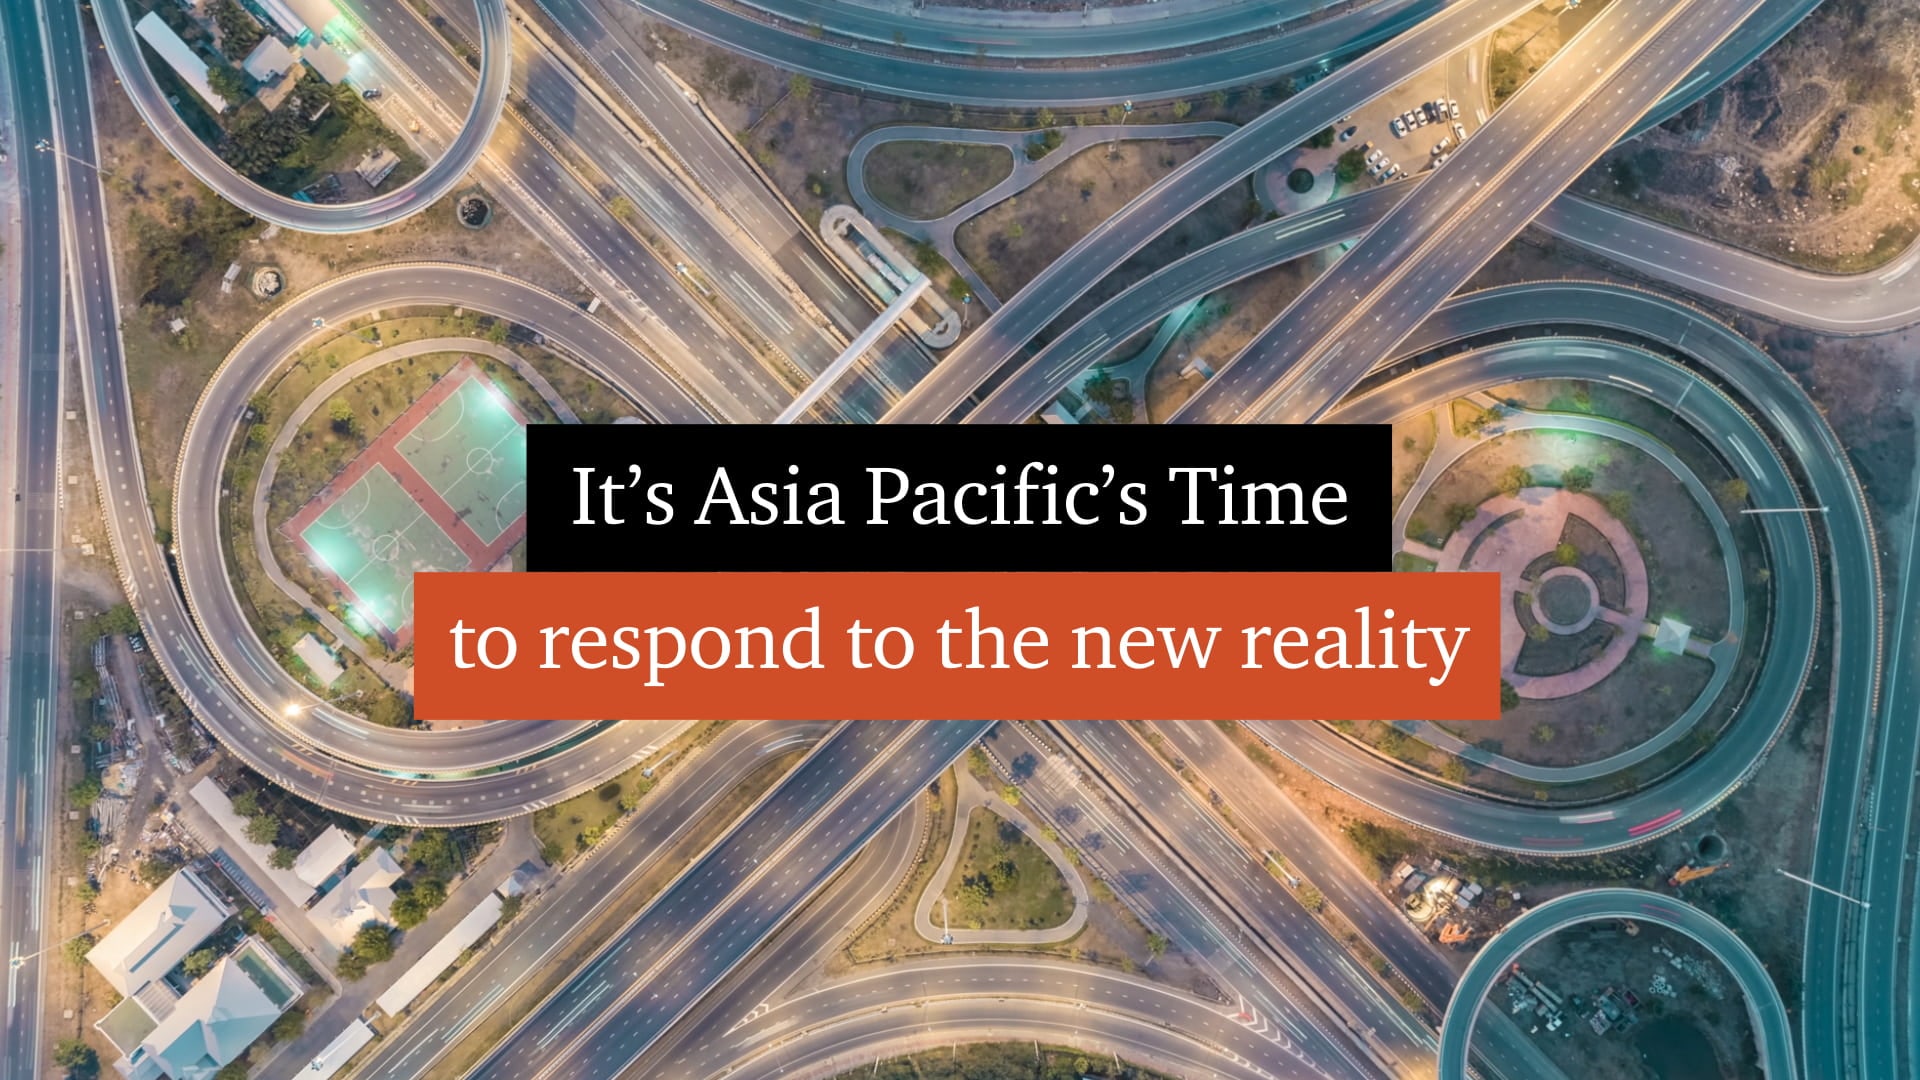 Asia Pacific's Time